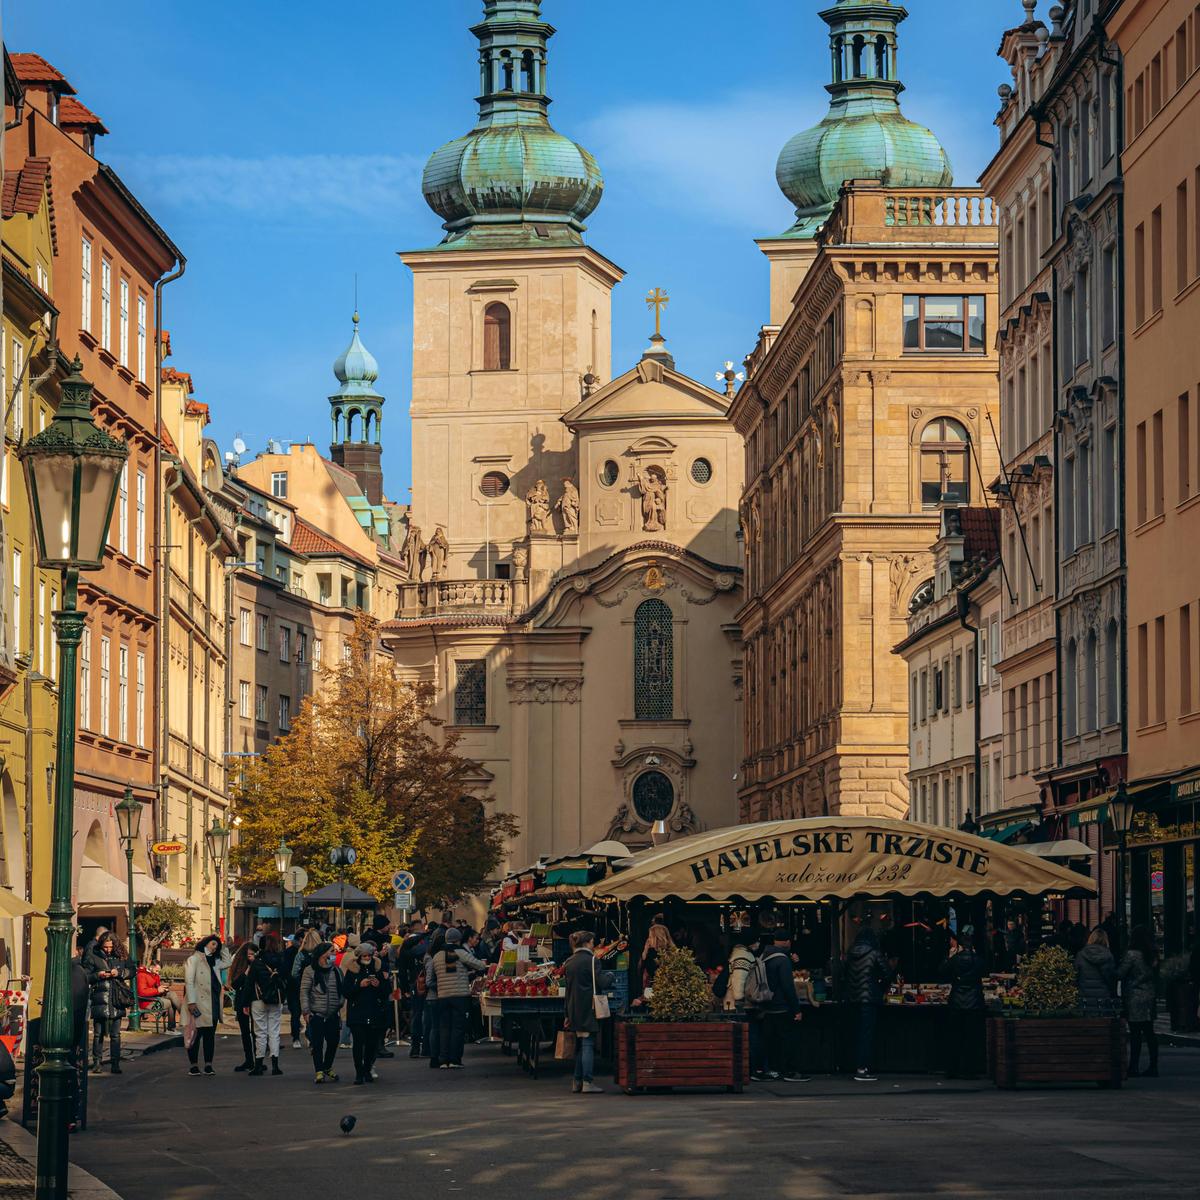 The Havelske Trziste market dates back to 1232 and sells fruits, vegetables, and arts and crafts. (Silvio Pelegrin/Pexels)